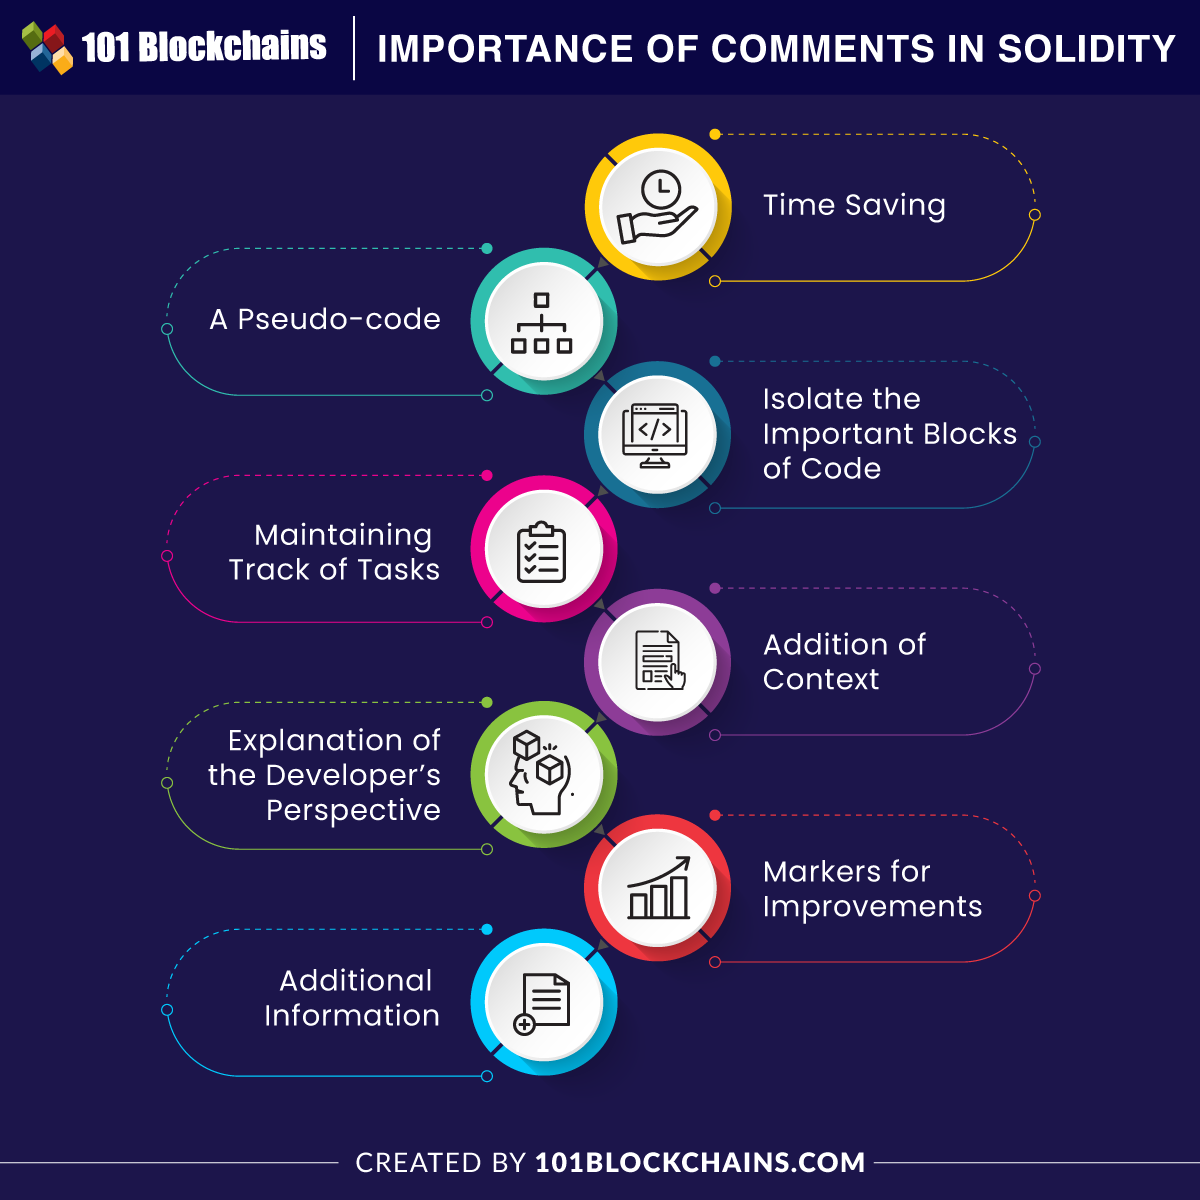 Importance of Comments in Solidity